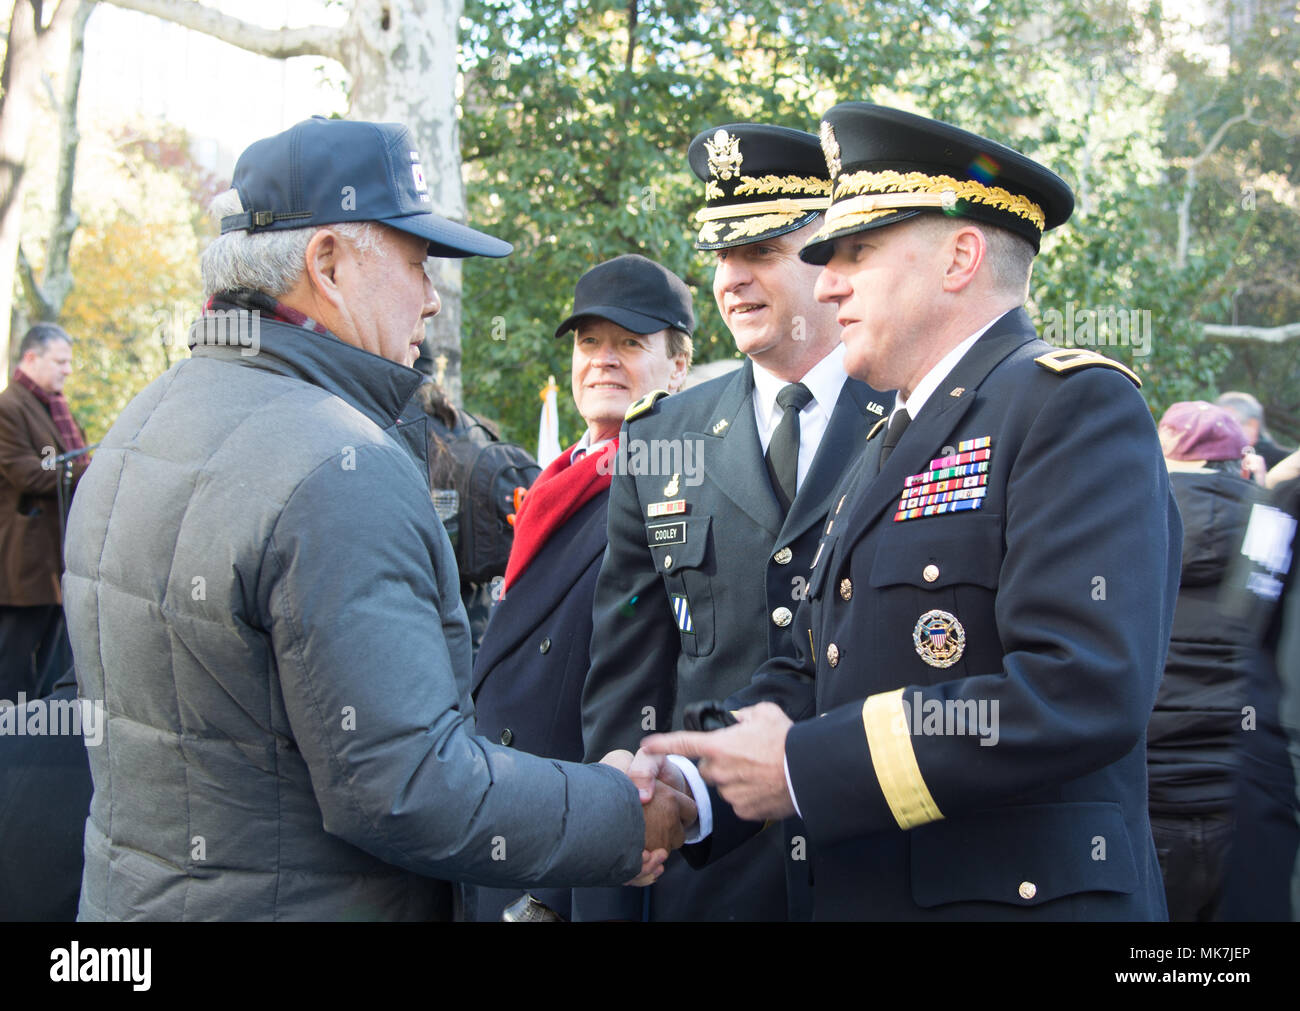 (Center) Brig. Gen. Robert S. Cooley, commander of the 353d Civil Affairs Command, and (Right) Maj. Gen. Mark W. Palzer, commander of the 79th Theater Sustainment Command, talk with a veteran (Left) at the opening wreath laying ceremony of the NYC Veterans Day Parade, November 11, 2017. (U.S. Army Reserve Photo by Maj. Addie Leonhardt, 80th Training Command) Stock Photo